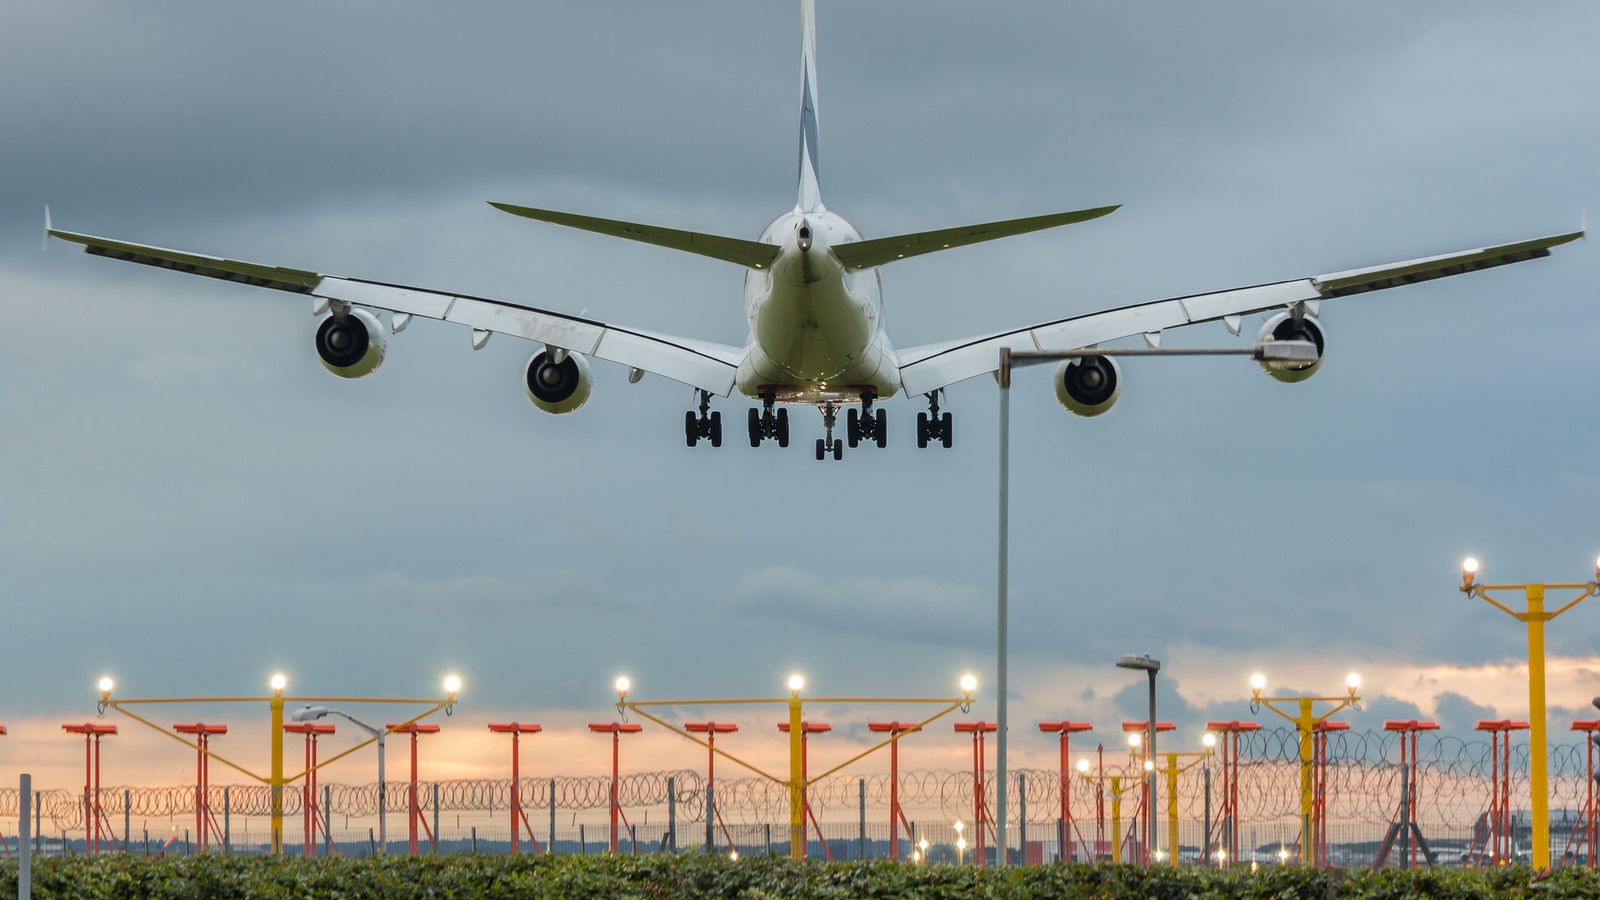 Heathrow says passenger numbers above pre-pandemic levels for first time